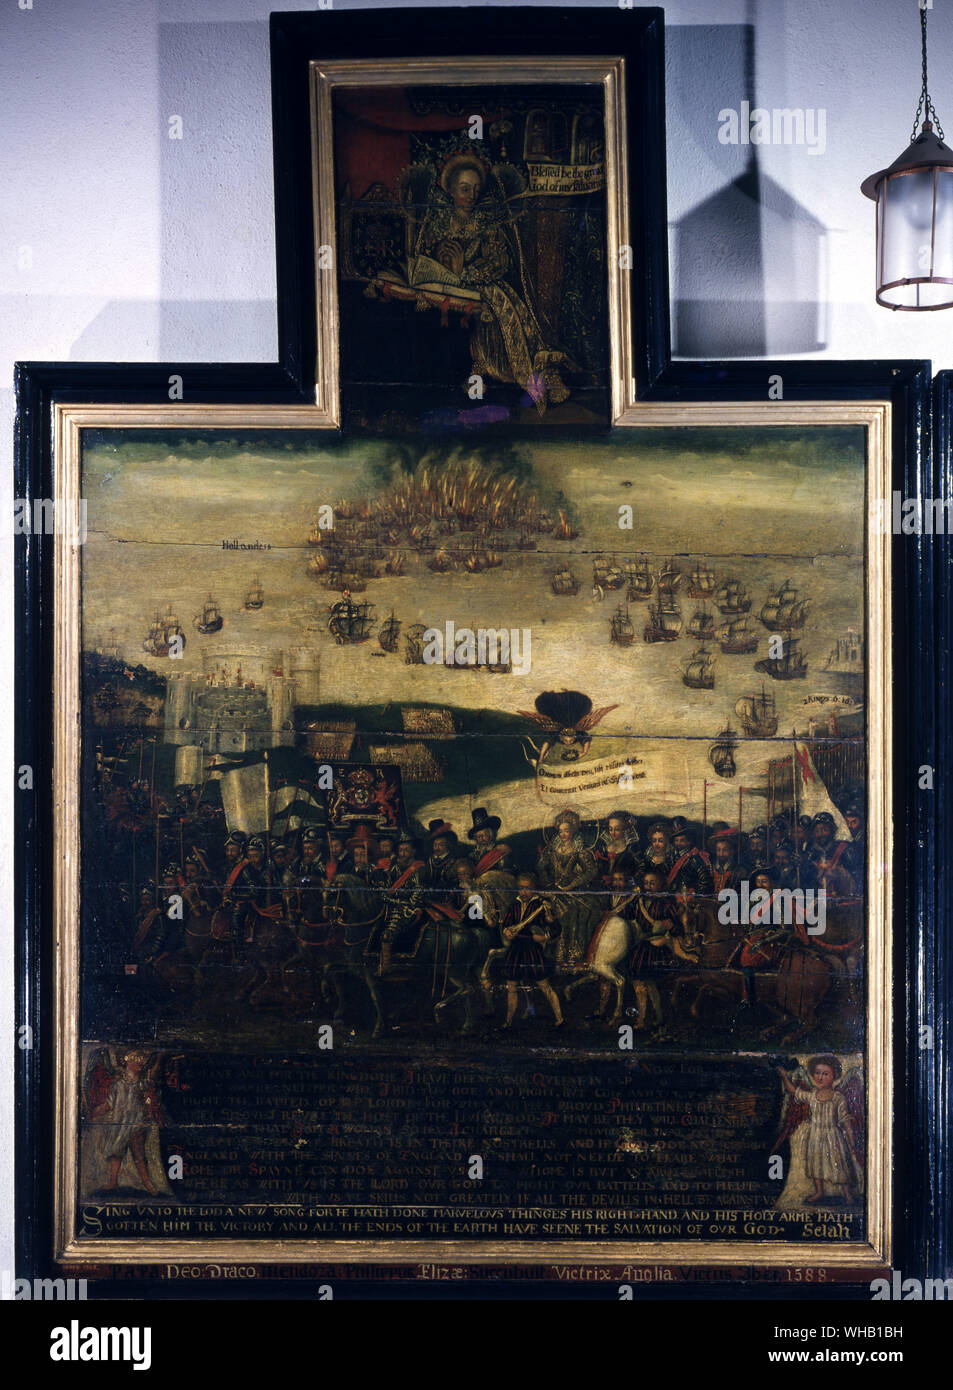 The Arrival of Queen Elizabeth I (1530-1603) at Tilbury. and the Defeat of the Spanish Armada - August 1588 - addressing her troops - left hand panel, by English School (17th century) said to be painted on wood from an Armada ship.. St. Faith's Church, Gaywood, Kings Lynn, Norfolk, UK.. Blessed be the great god of my salvation . Stock Photo